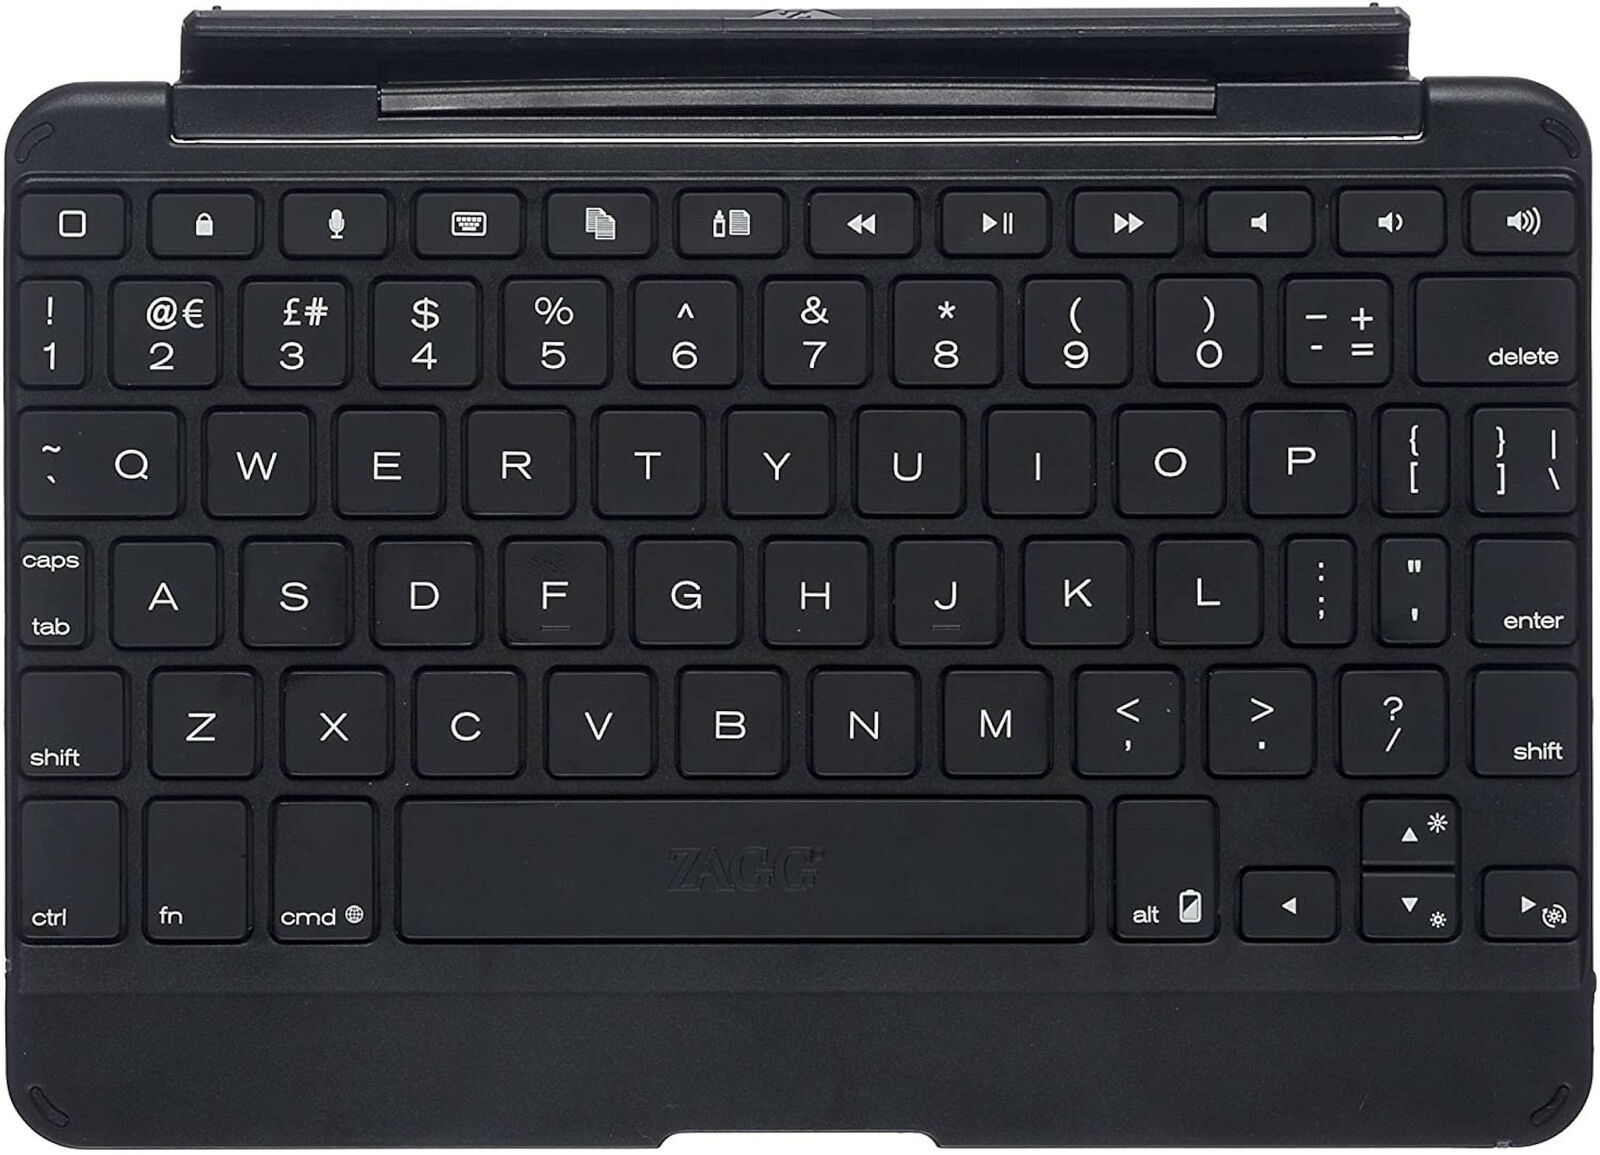 NEW Zaggkeys UltraThin Cover with Backlit Bluetooth Keyboard for Apple iPad Mini - $26.28